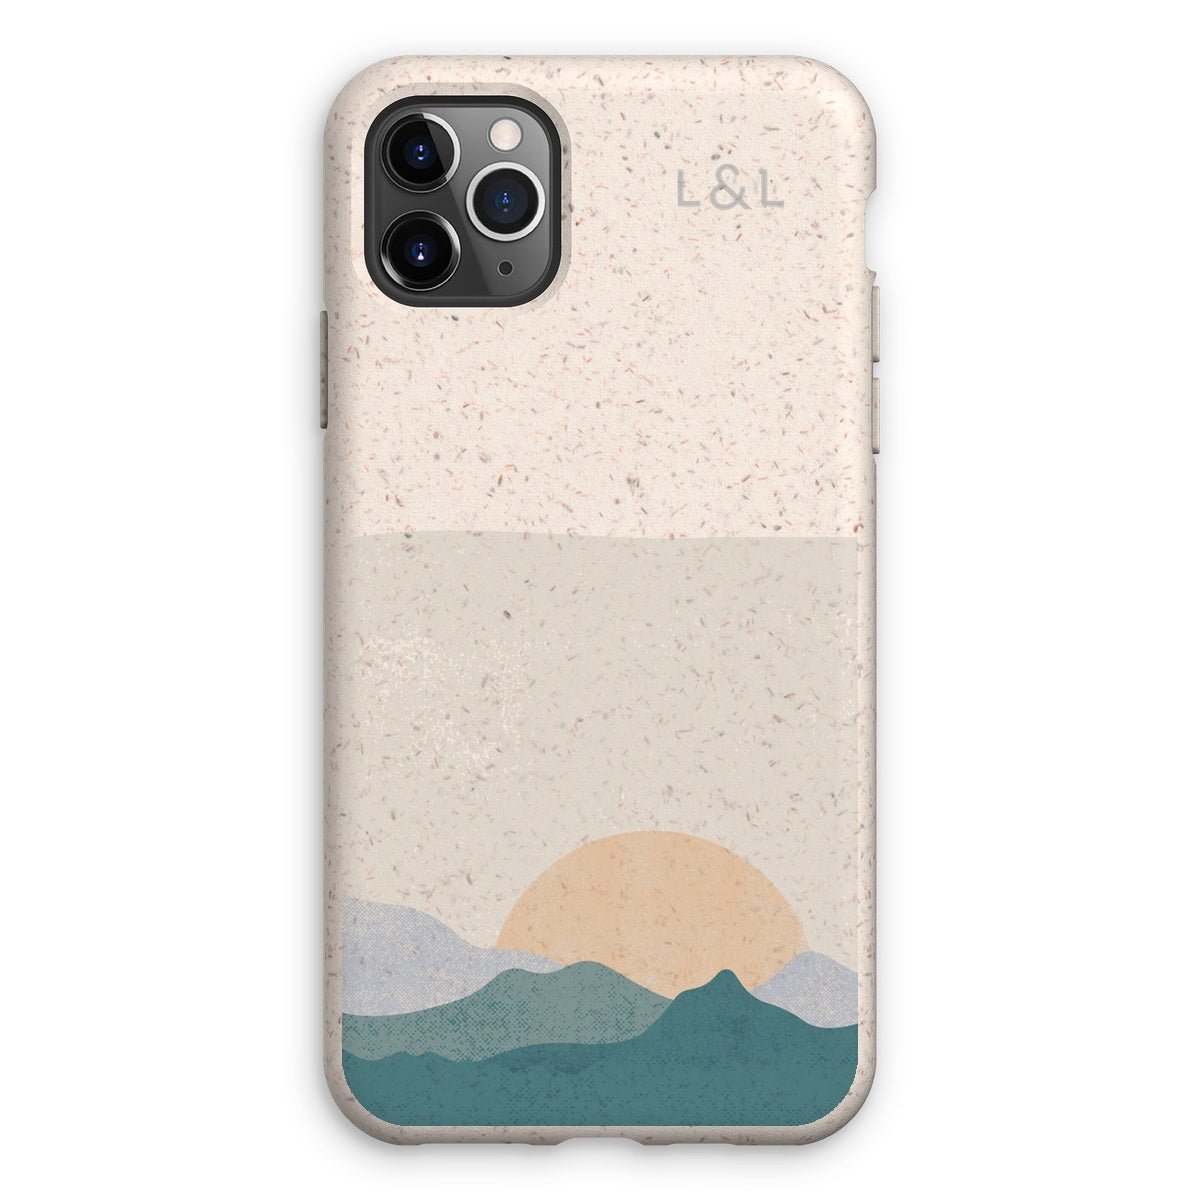 Sunset over the mountain Eco Phone Case - Loam & Lore